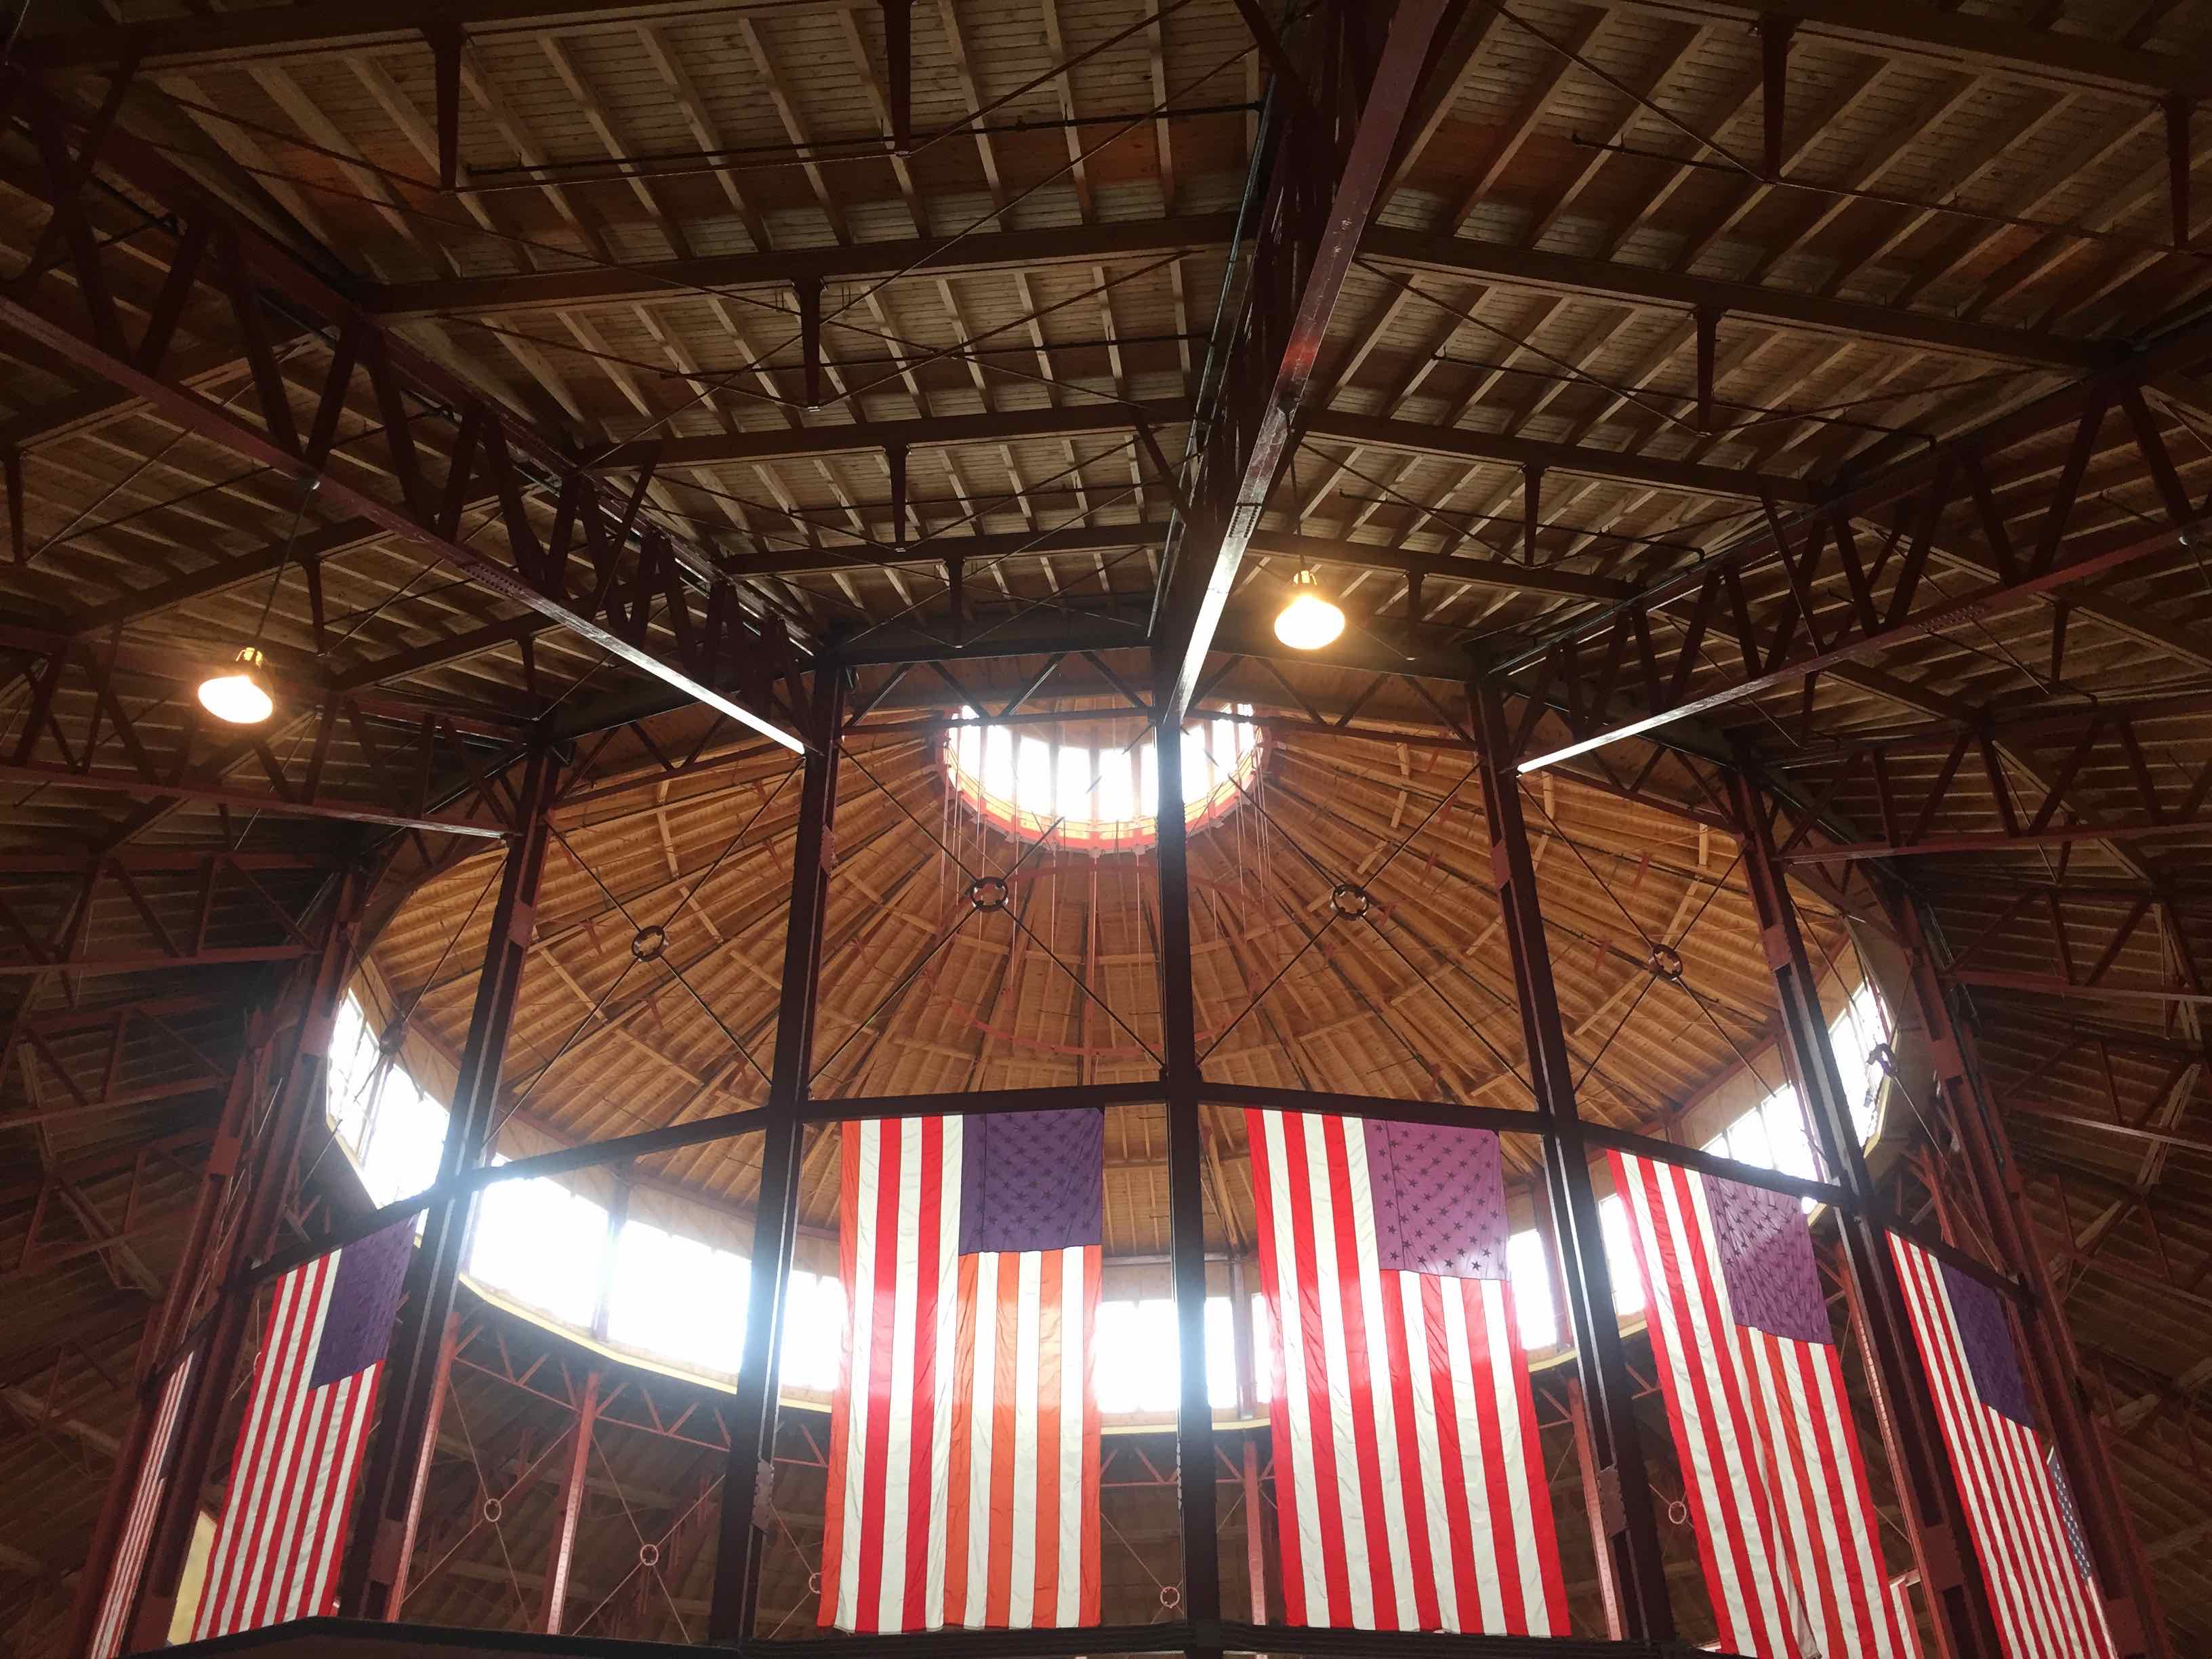 Photo: The roundhouse of a former train station looking up. Windows around the top letting in the sun, surrounded by American flags hanging from the ceiling.